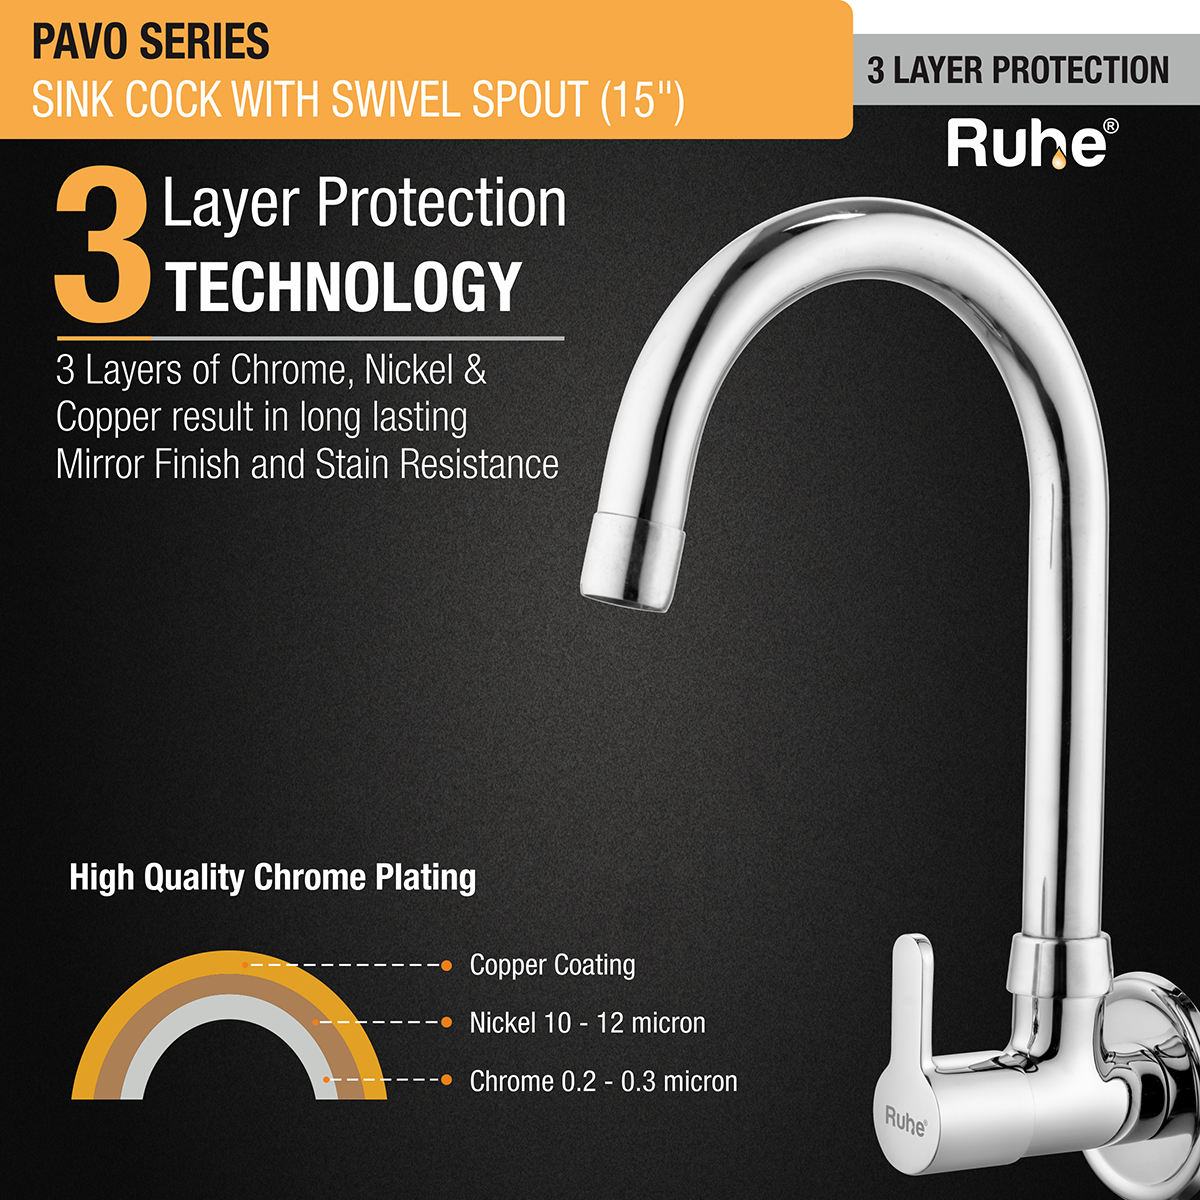 Pavo Sink Tap with Medium (15 inches) Round Swivel Spout Brass Faucet 3 layer protection